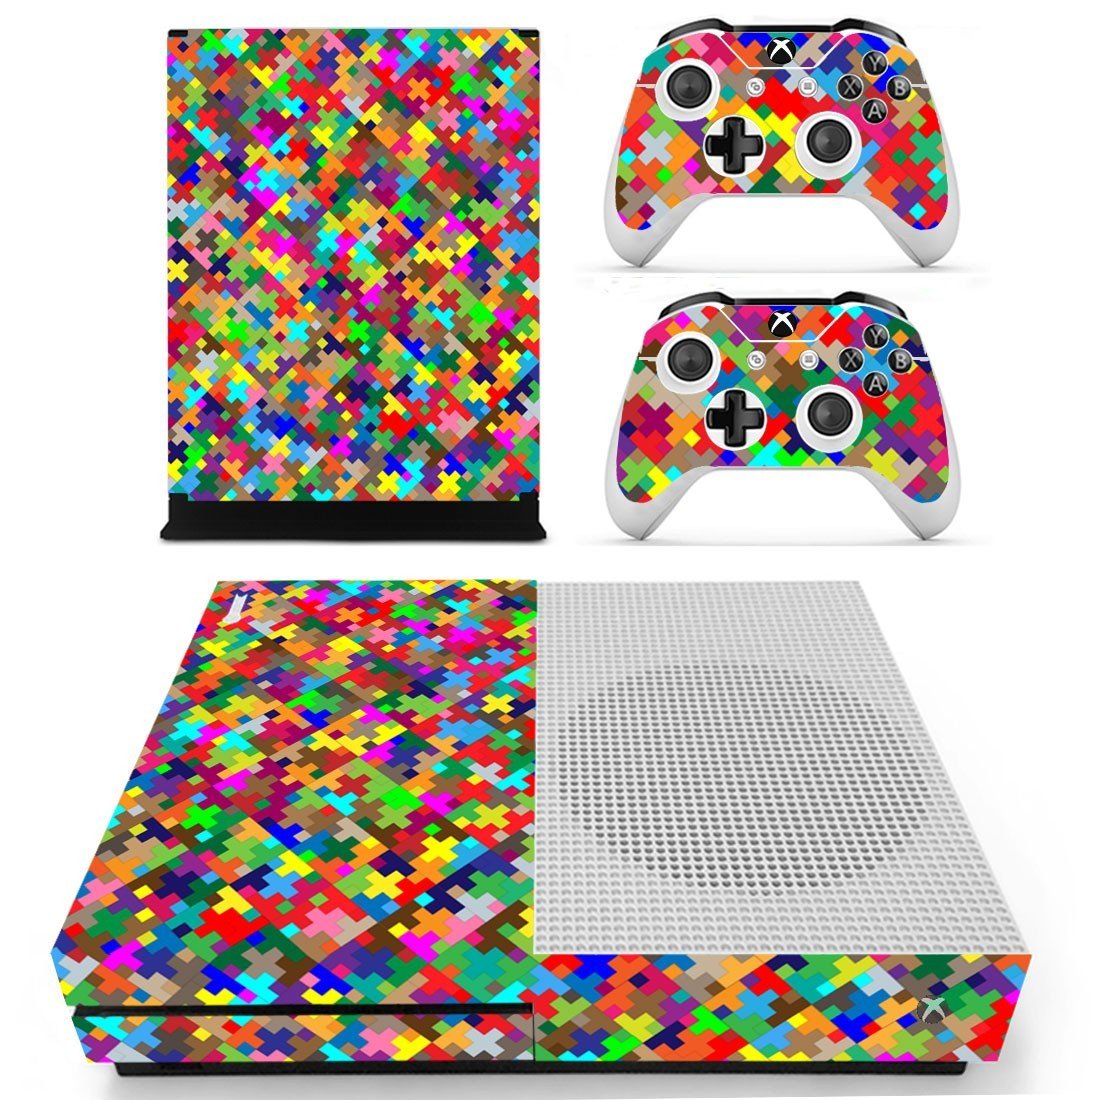 Abstraction Sticker For Xbox One S And Controllers